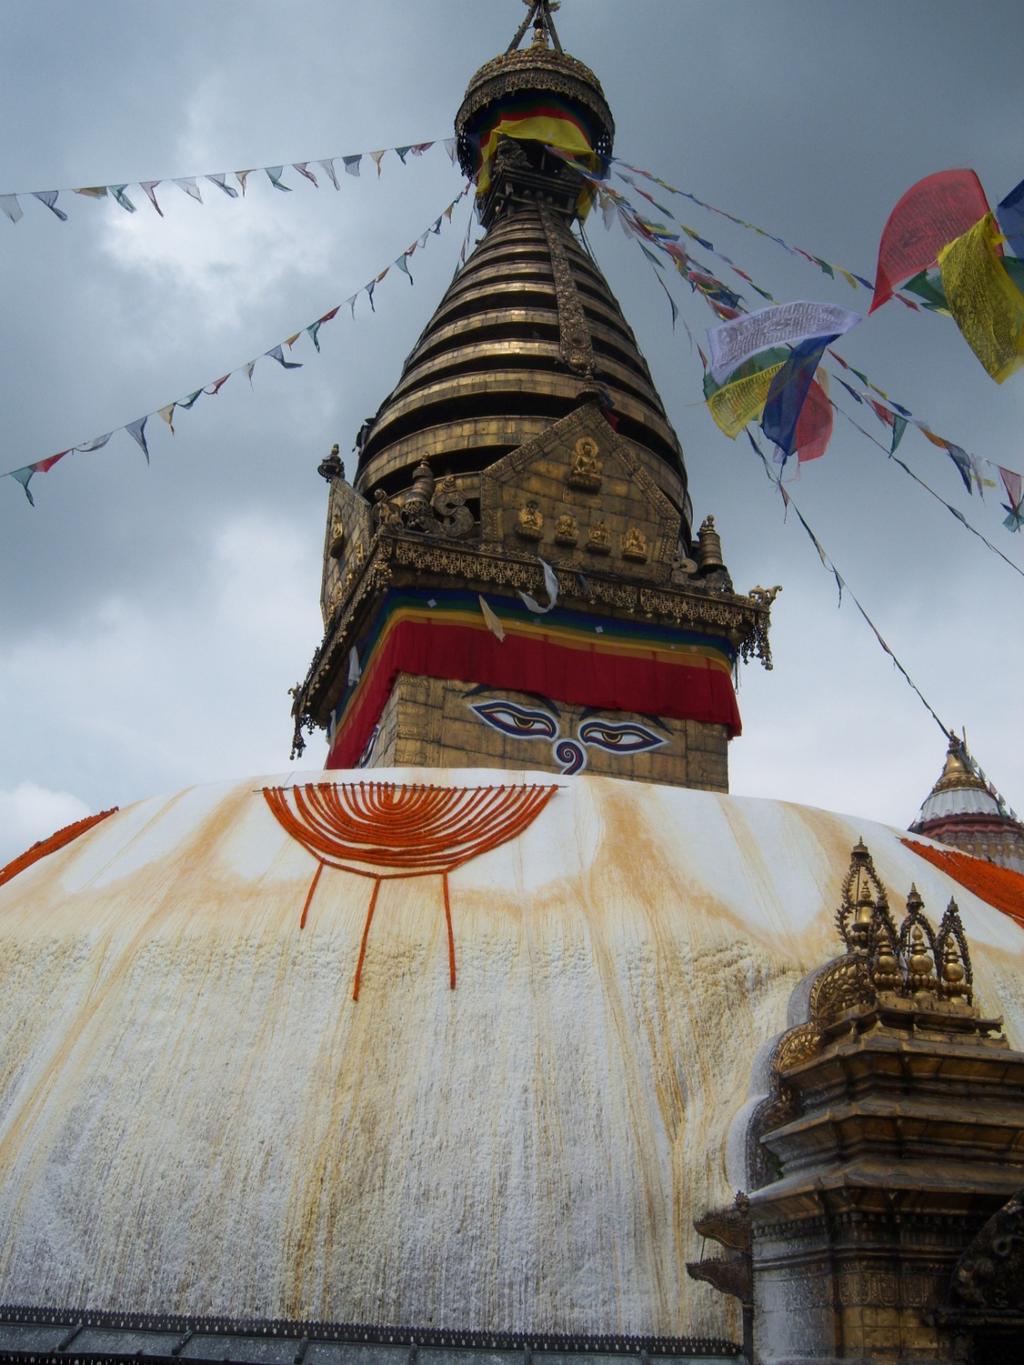 This colorful Buddhist stupa was dressed in Tibetan prayer flags and marigolds for a holy day.